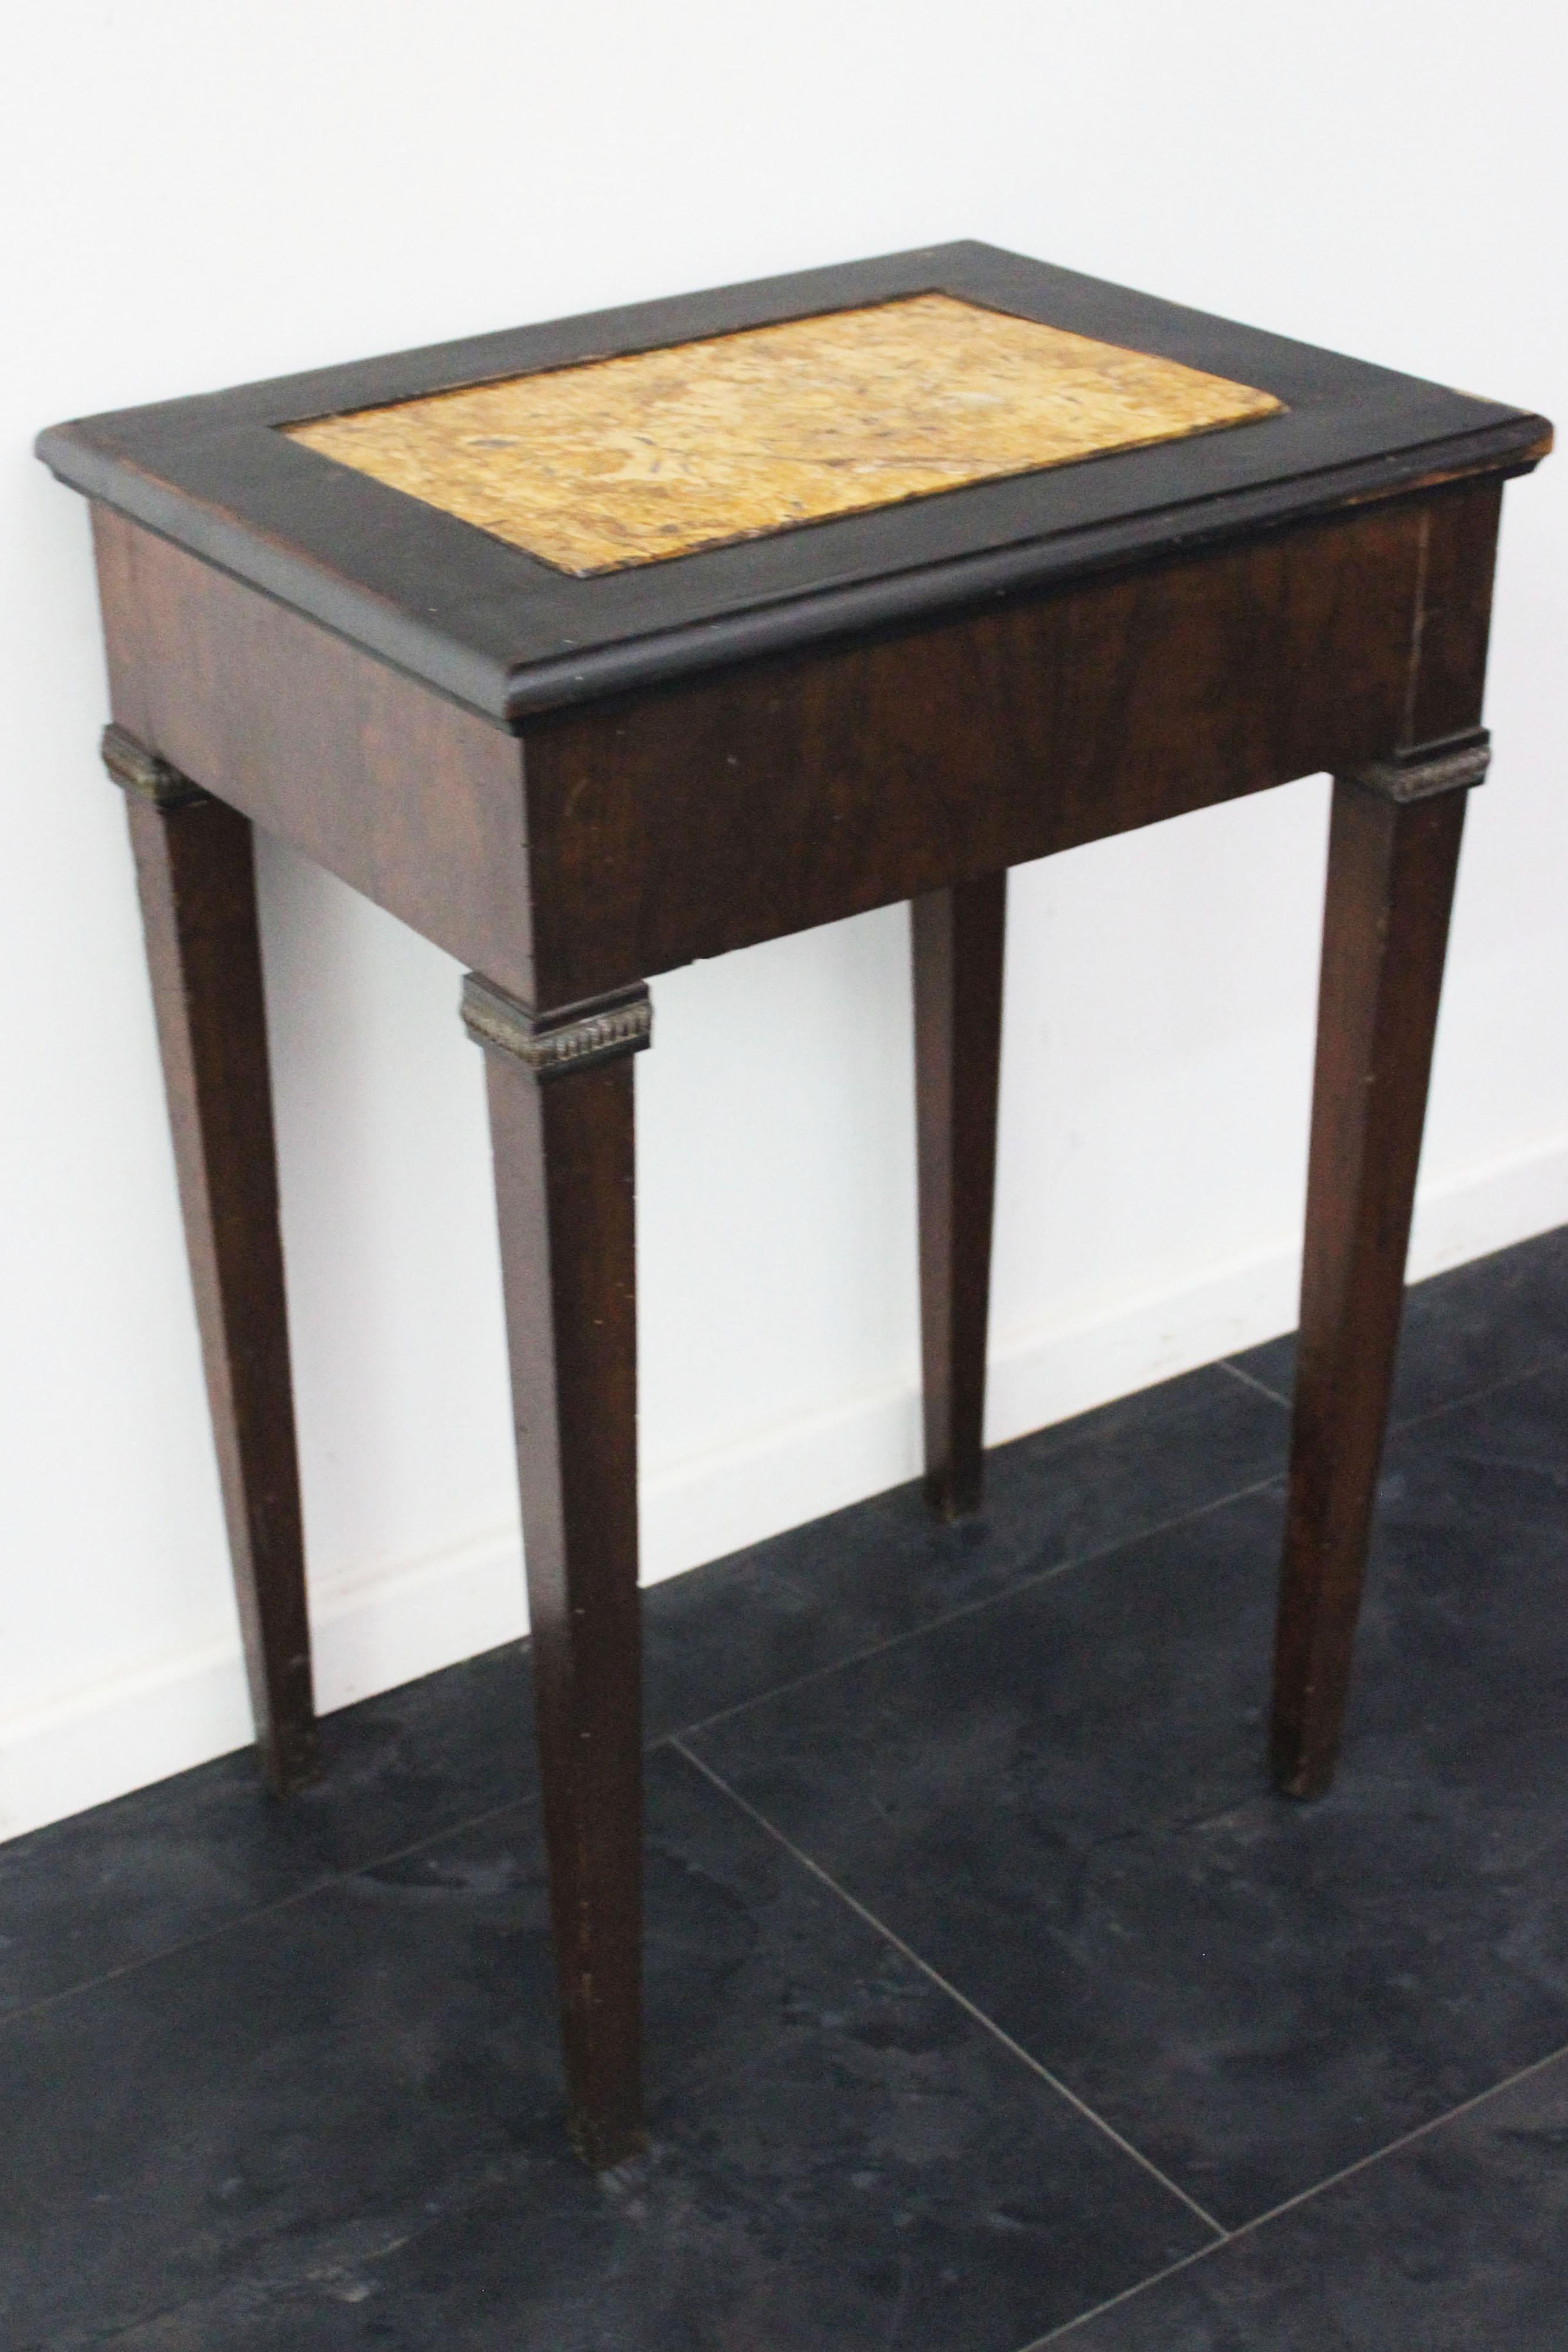 Louis XVI coffee table in walnut with top in yellow Siena marble, undertop veneered in walnut. The pyramidal legs in solid walnut are connected to the body with a carved and gilded profile. The top is ebonized, with a yellow Siena marble slab in the